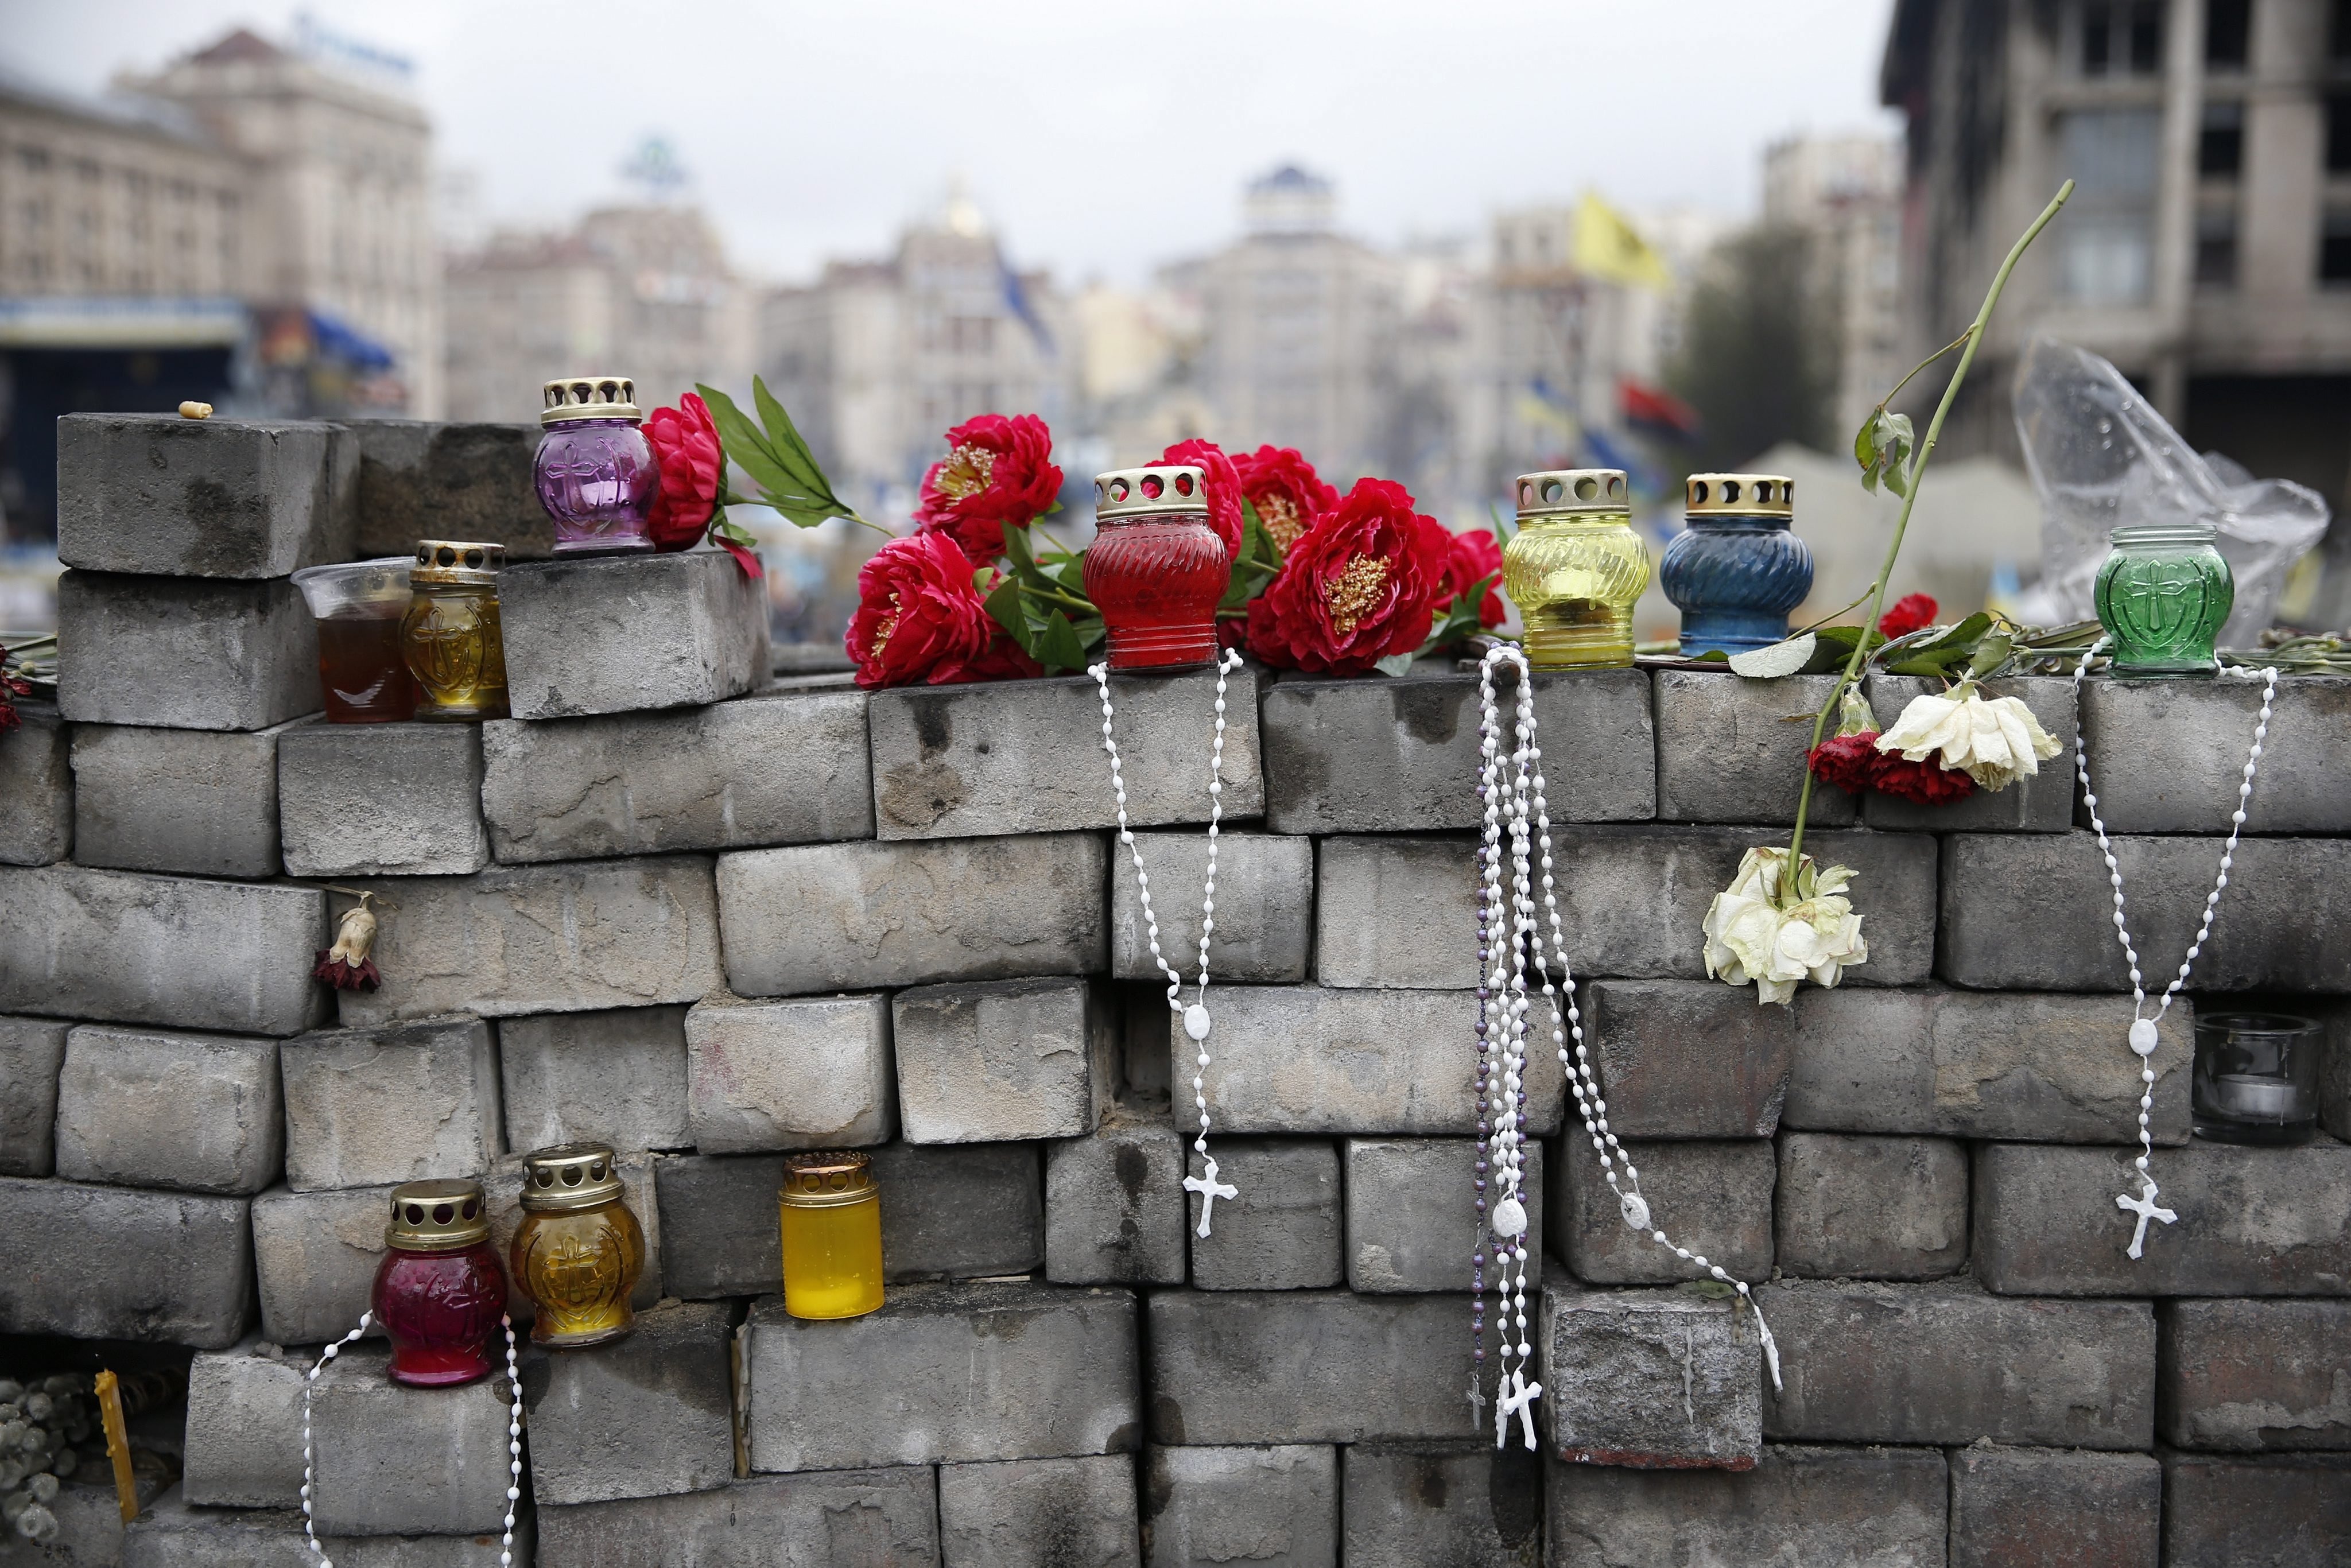 Apr. 14, 2014. Flowers, candles and beads are seen on an improvised wall made of pavement stones at the Maidan, or Independence Square, in Kiev, Ukraine.